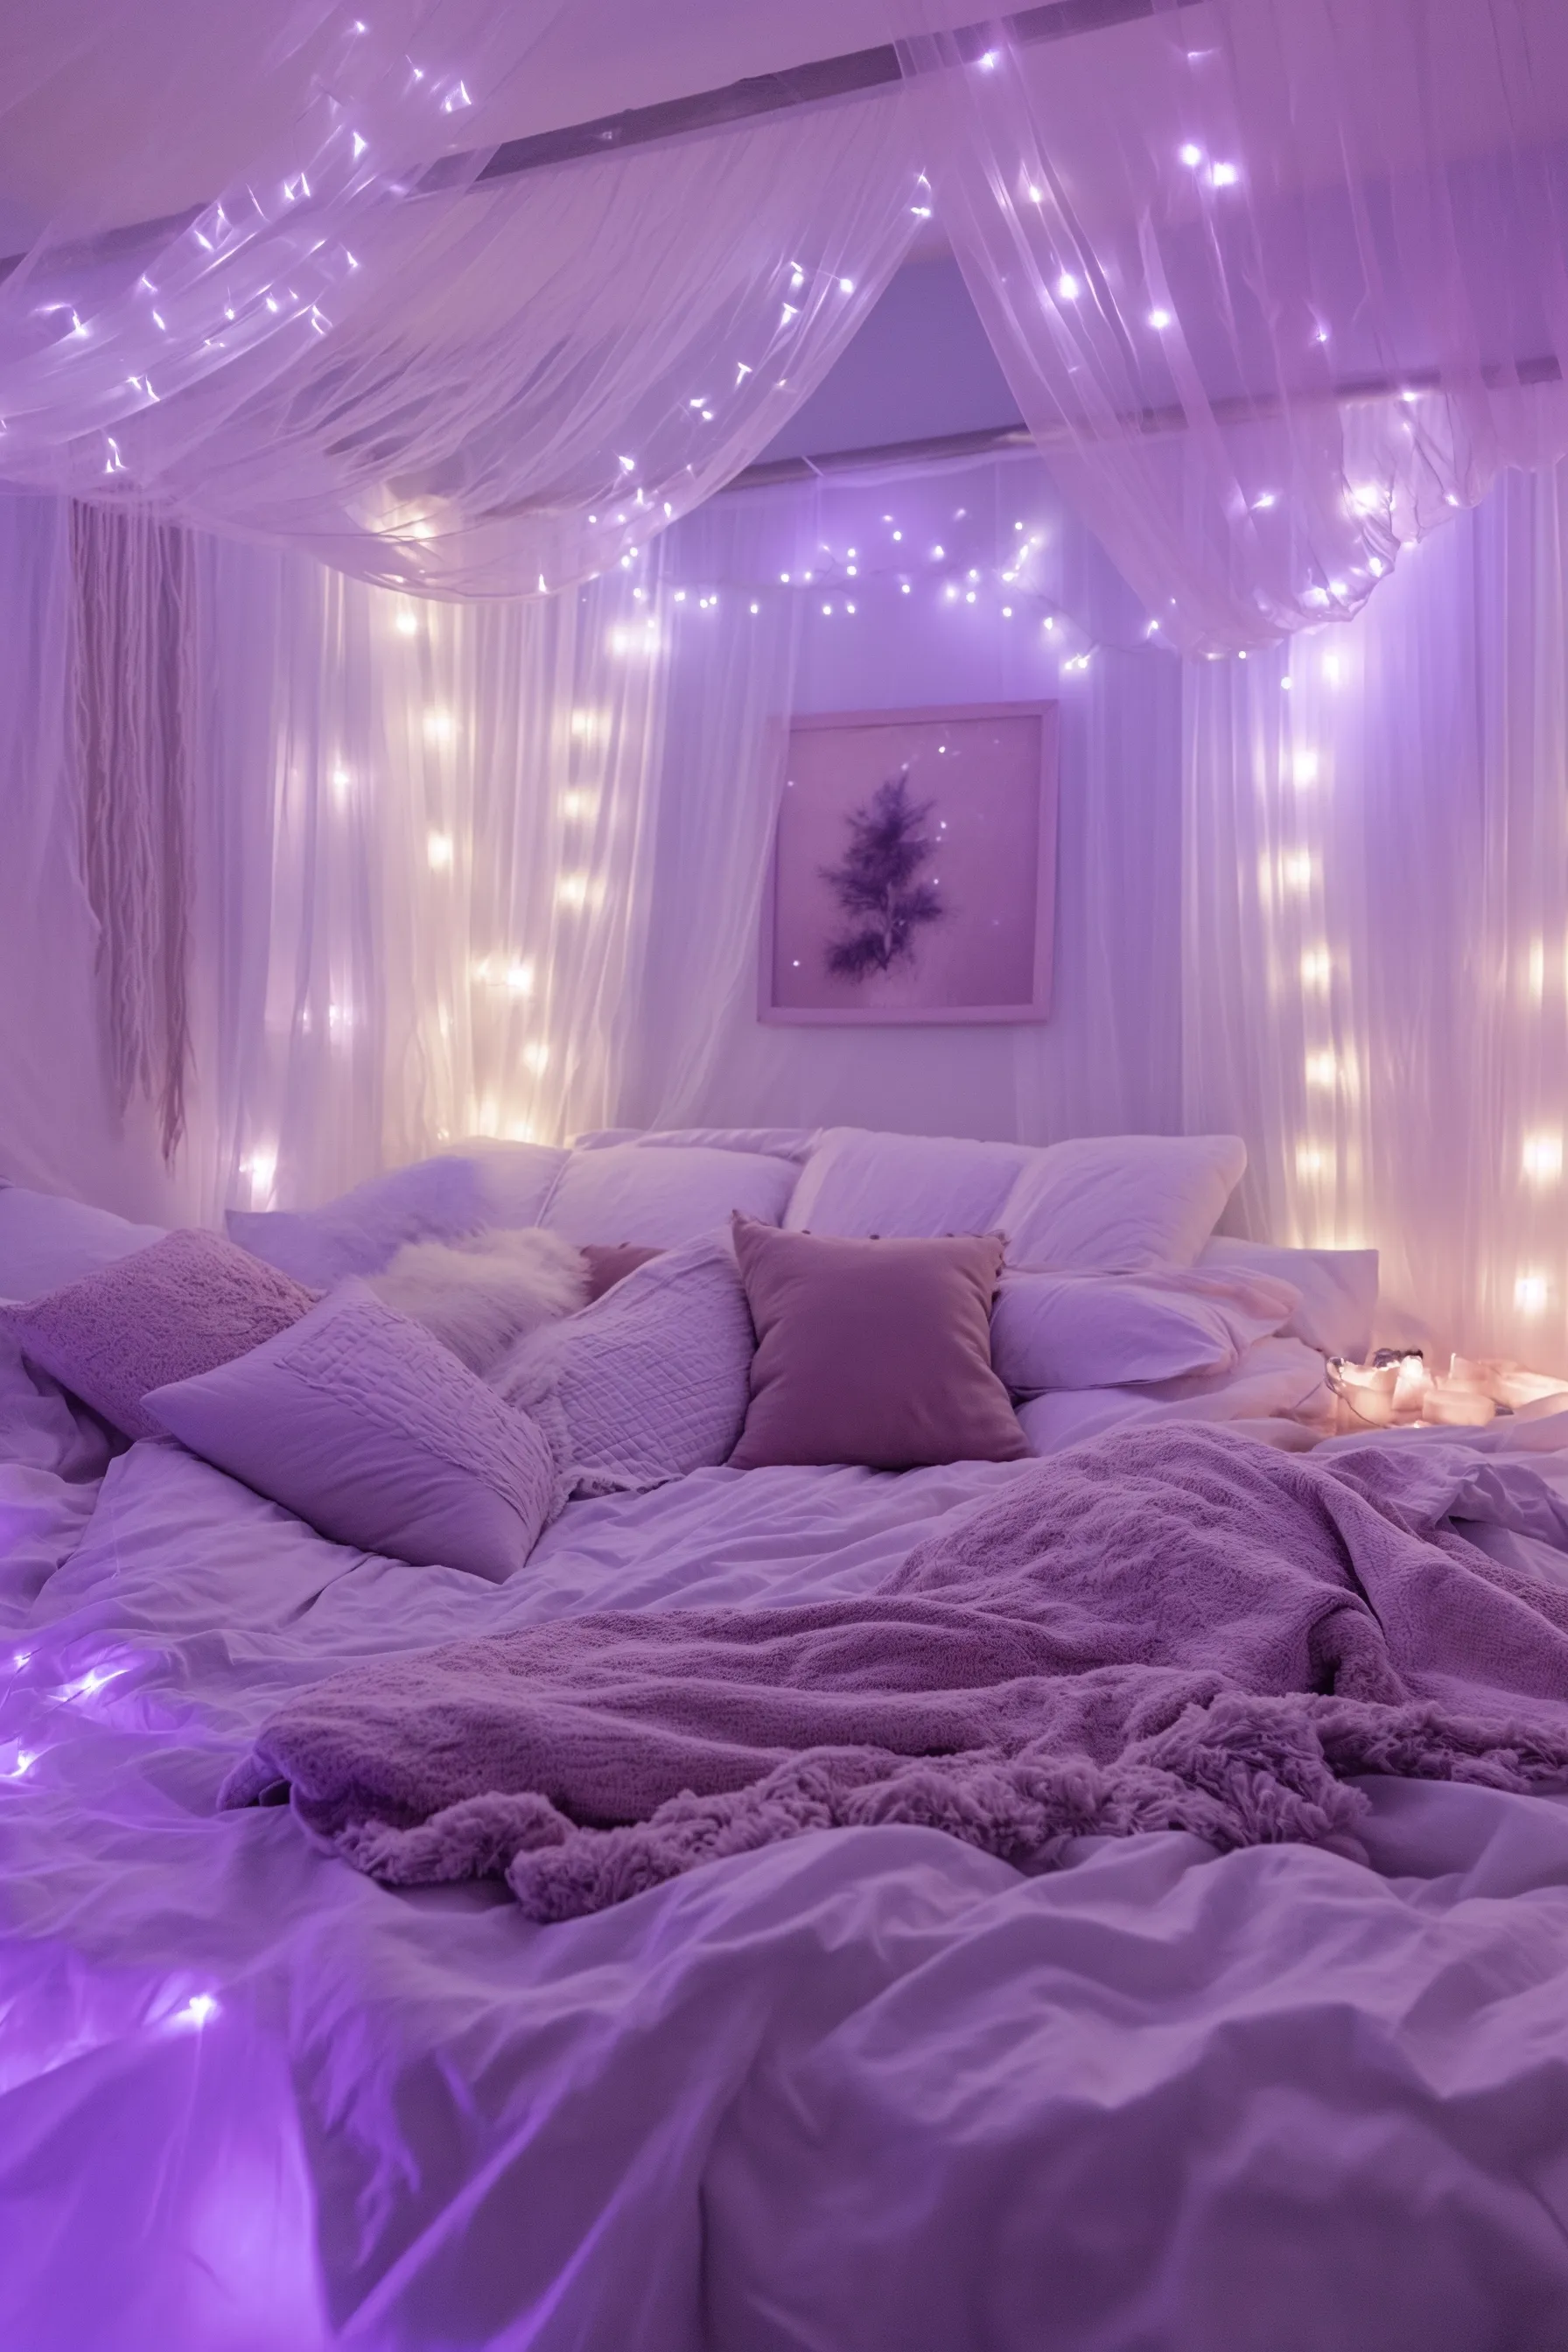 A purple and white bedroom with fairy lights